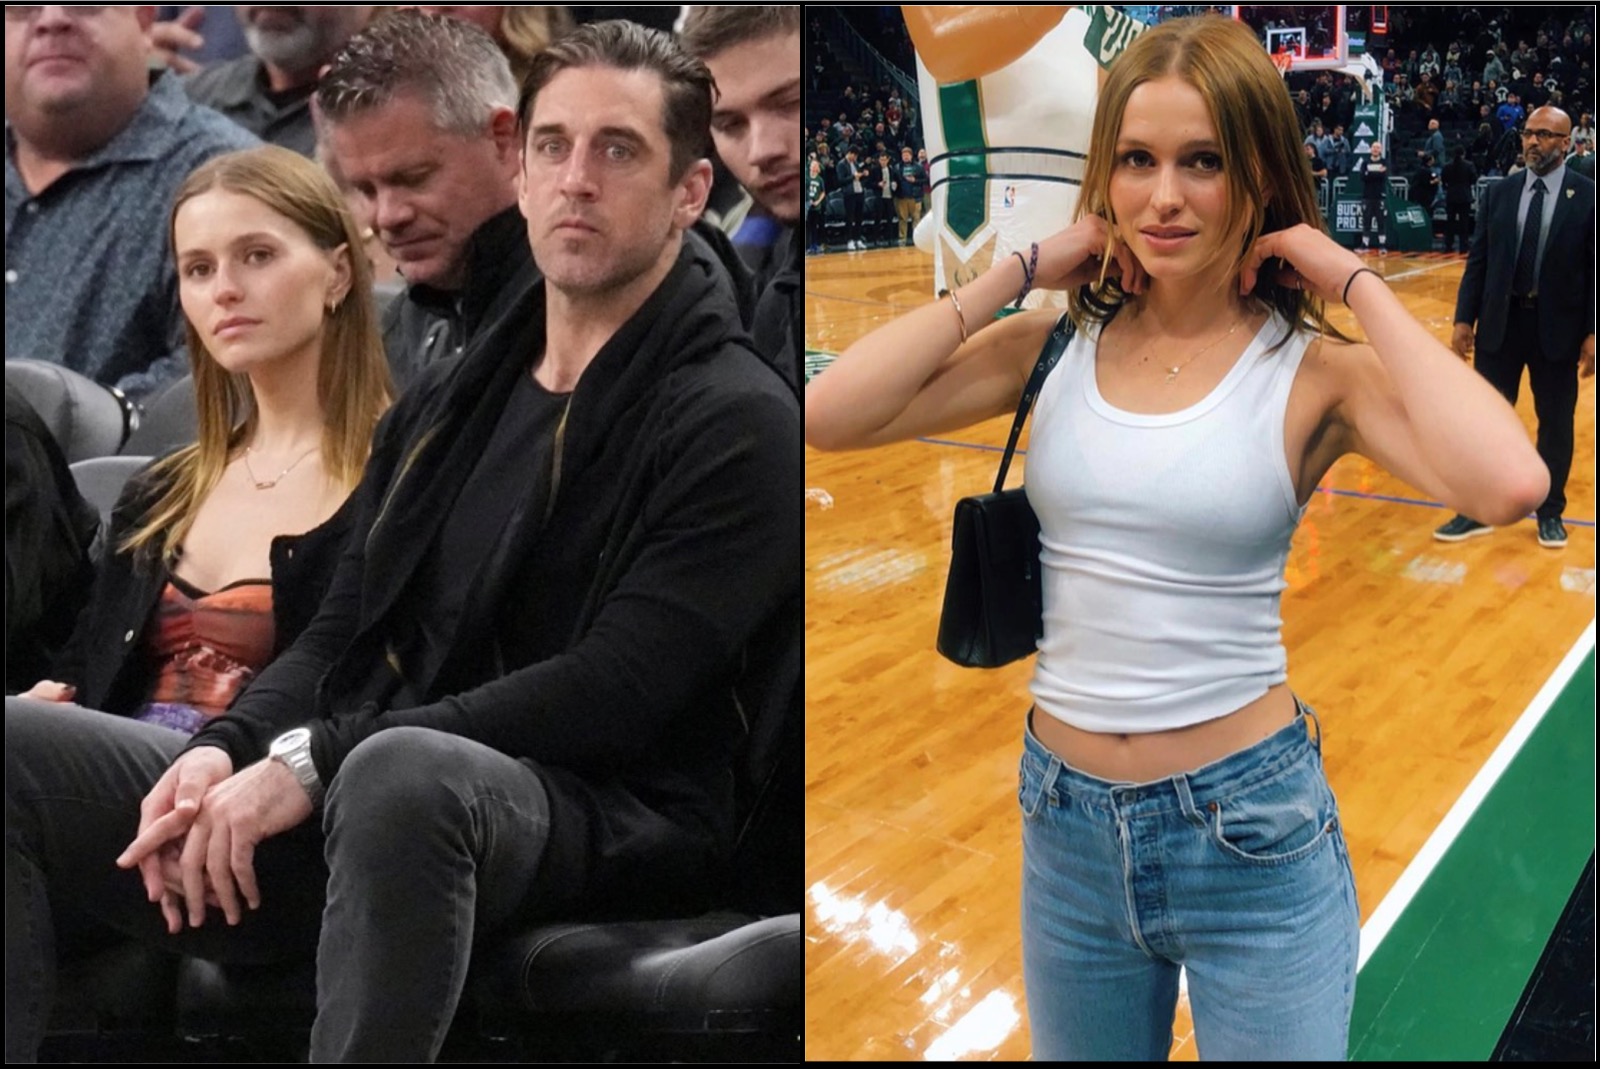 Aaron Rodgers is Dating Bucks Owner’s Daughter Mallory Edens After Being Spotted Courtside at Game